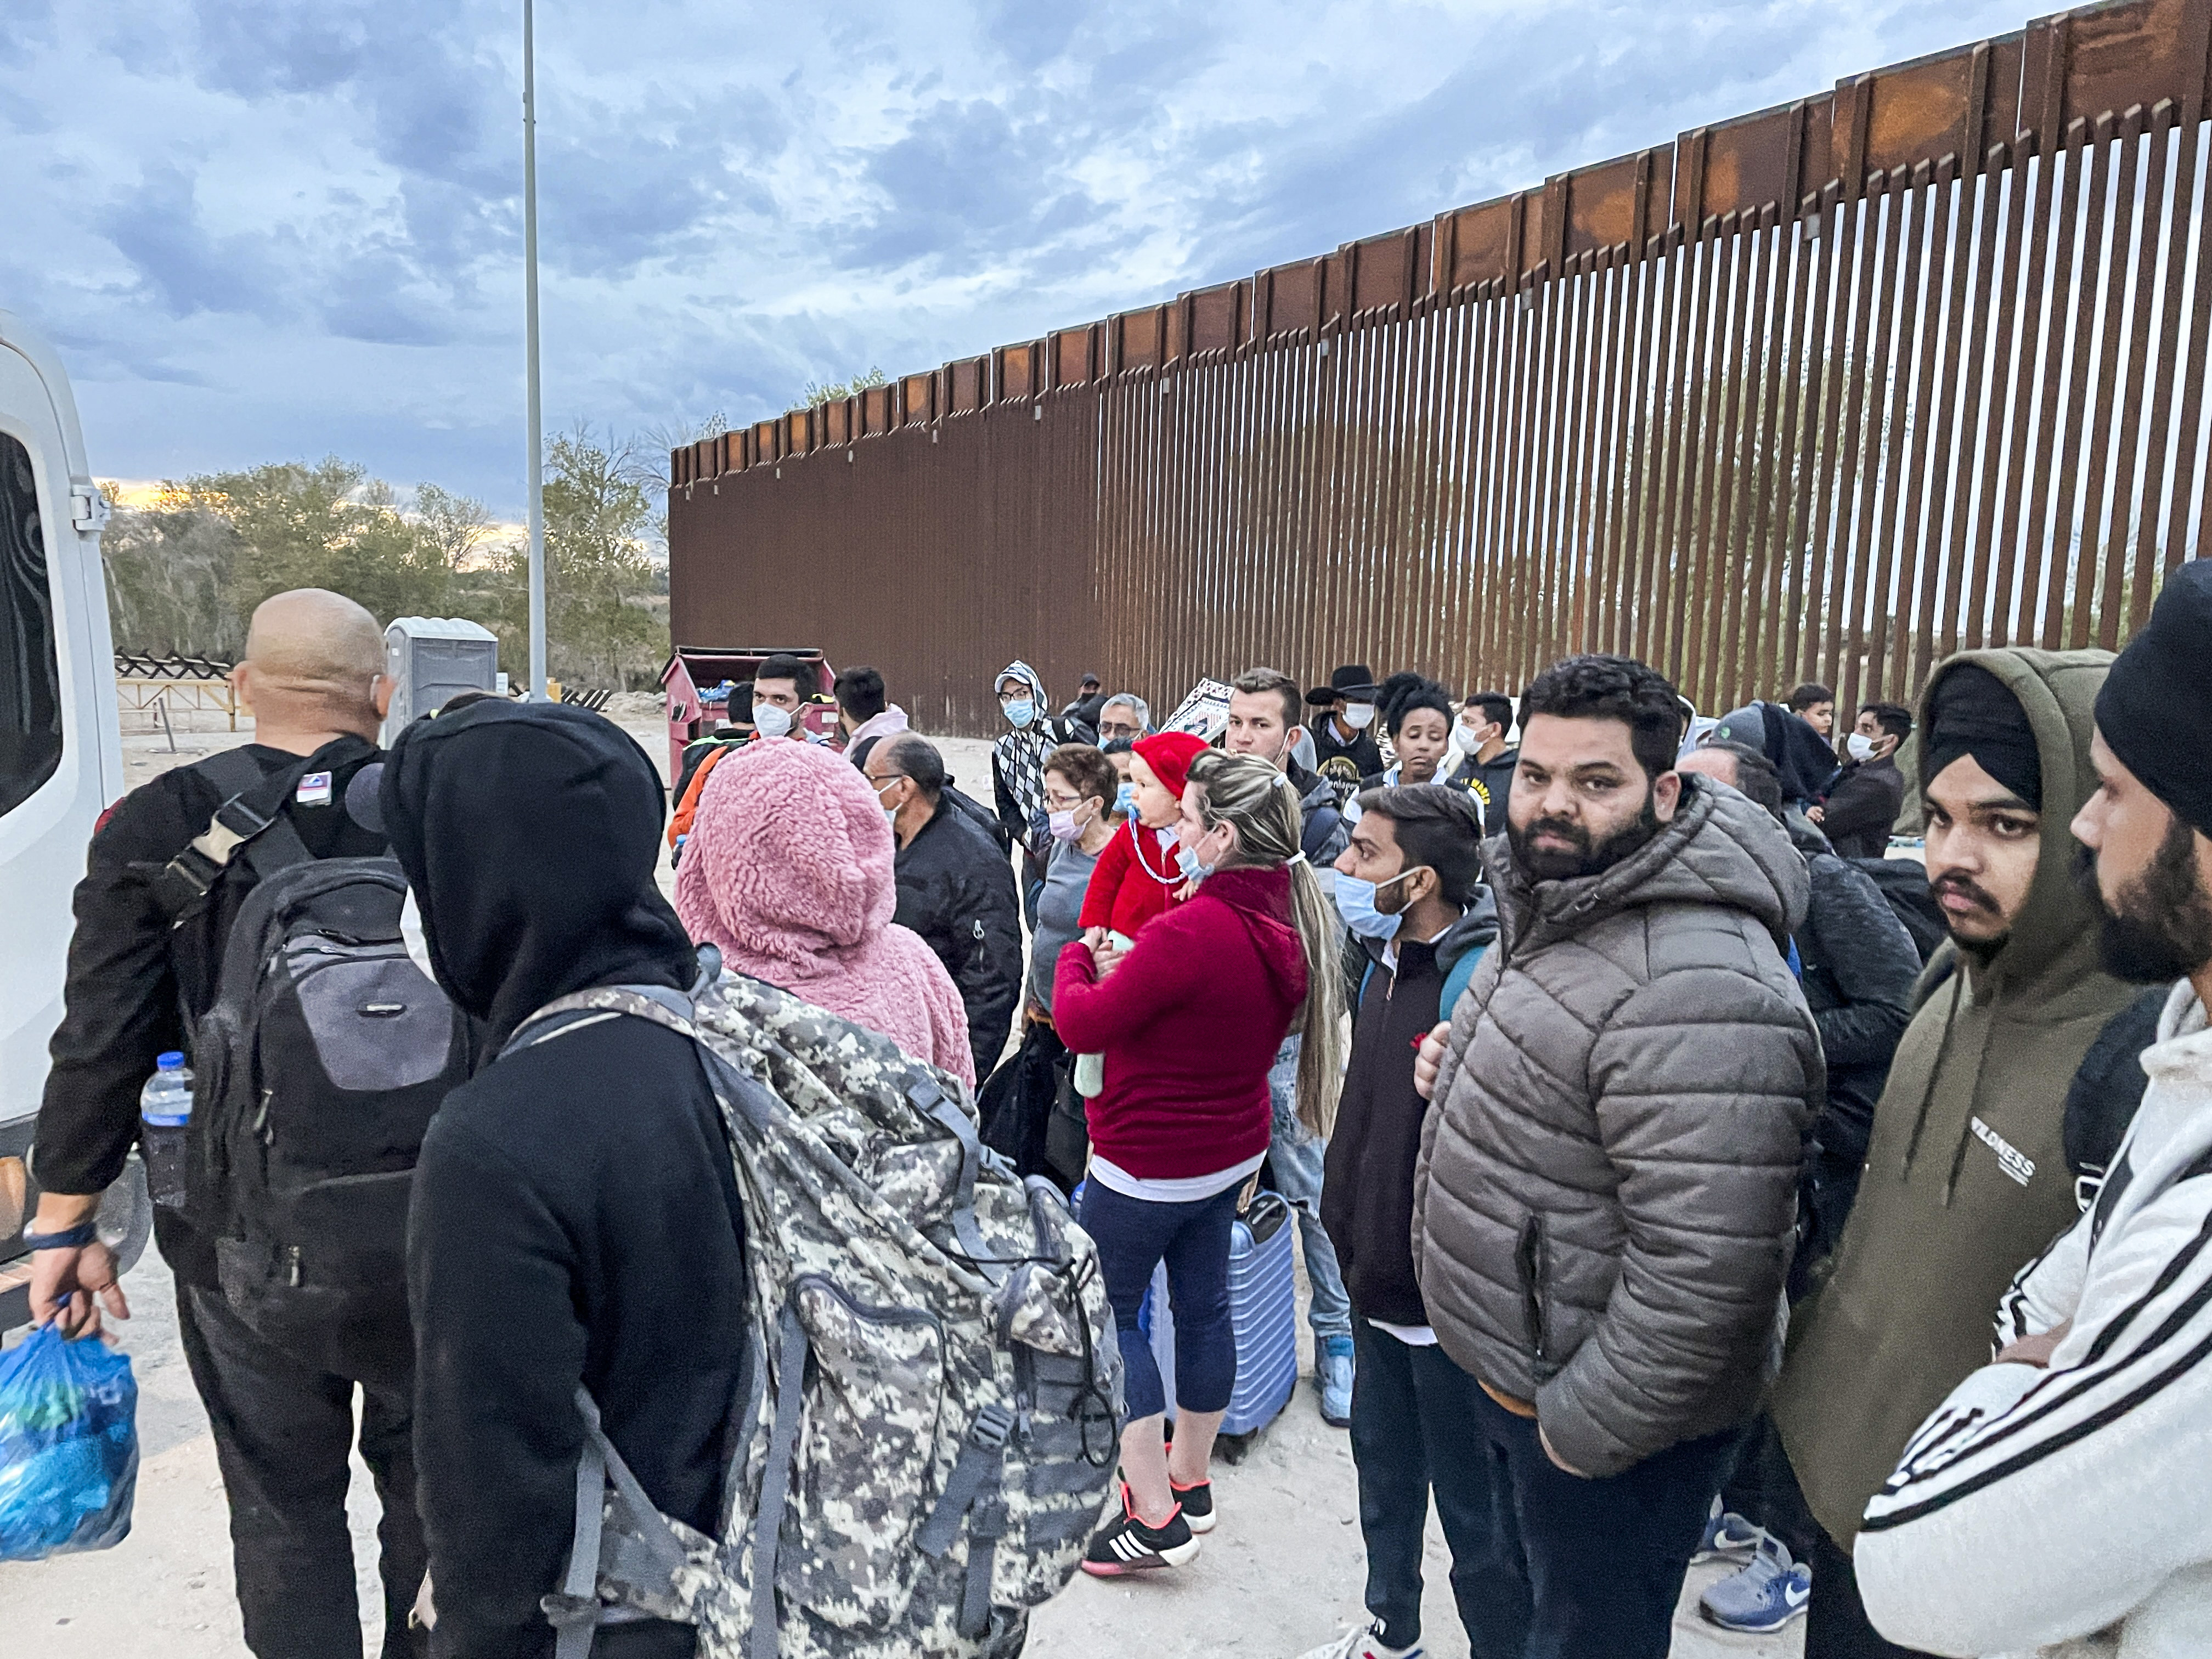 72 Percent of Illegal Border Crossers Hail From Countries Other Than Mexico